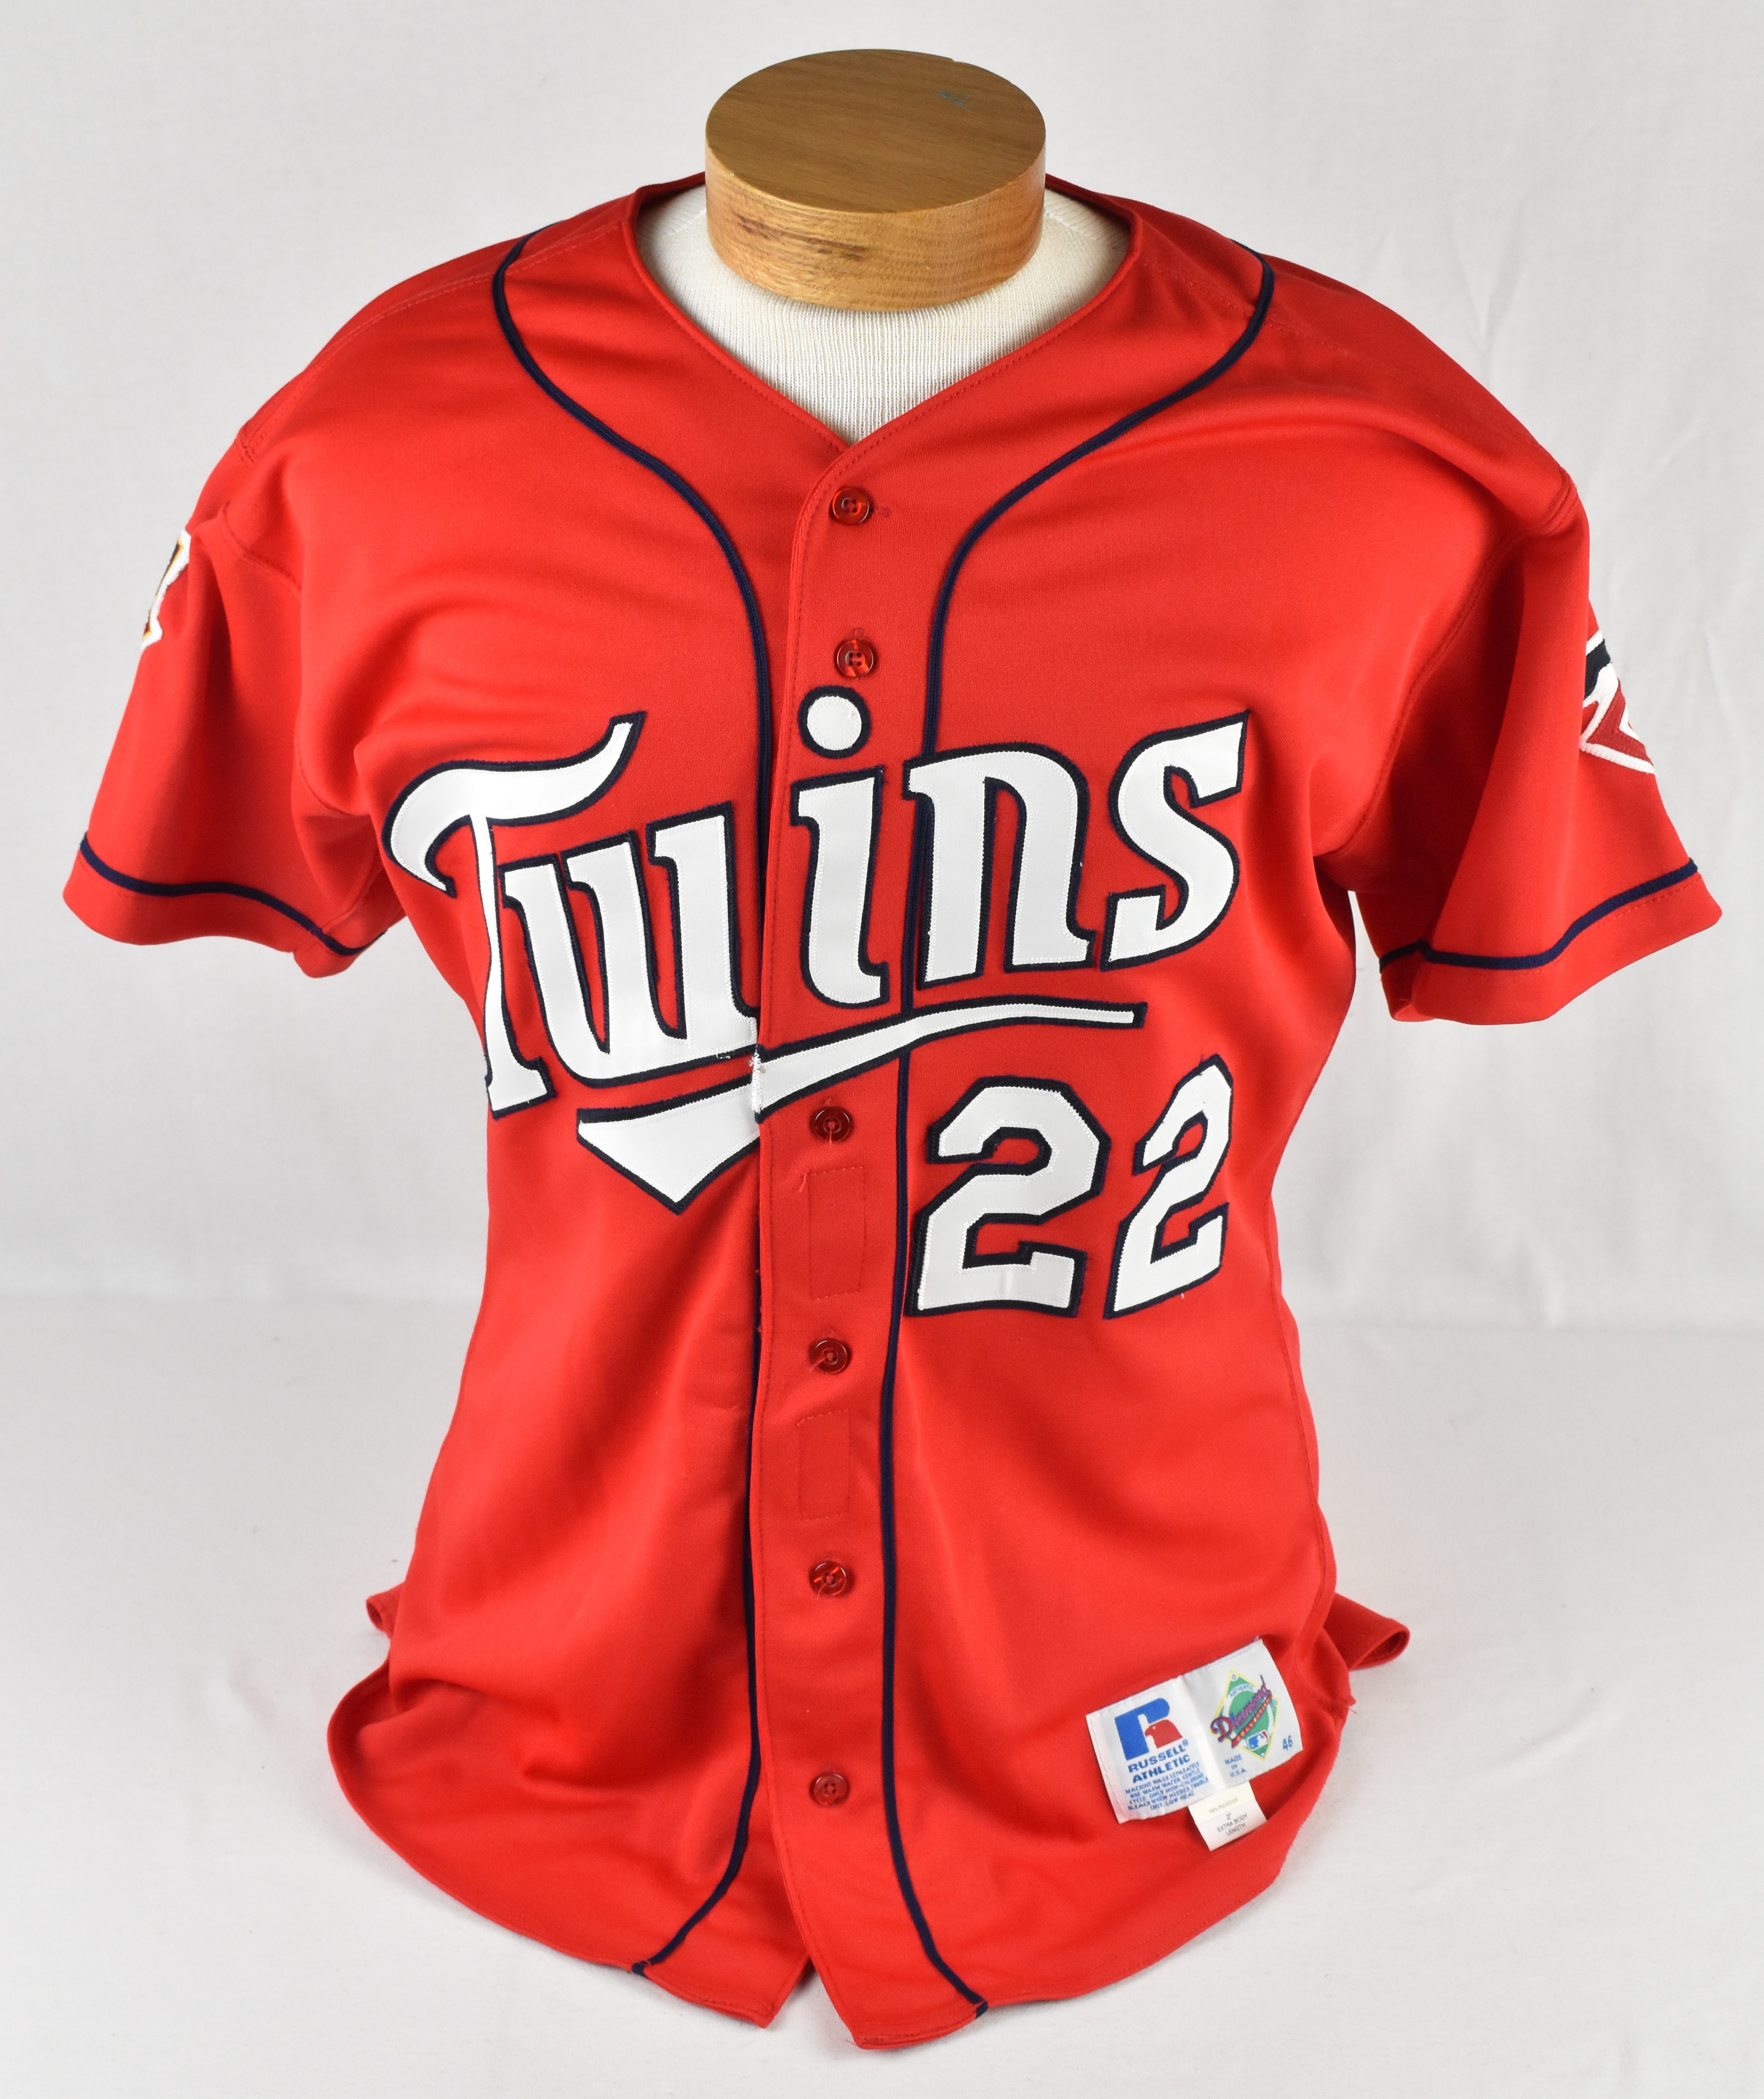 Twins 1997 Home Red Sunday Jersey 